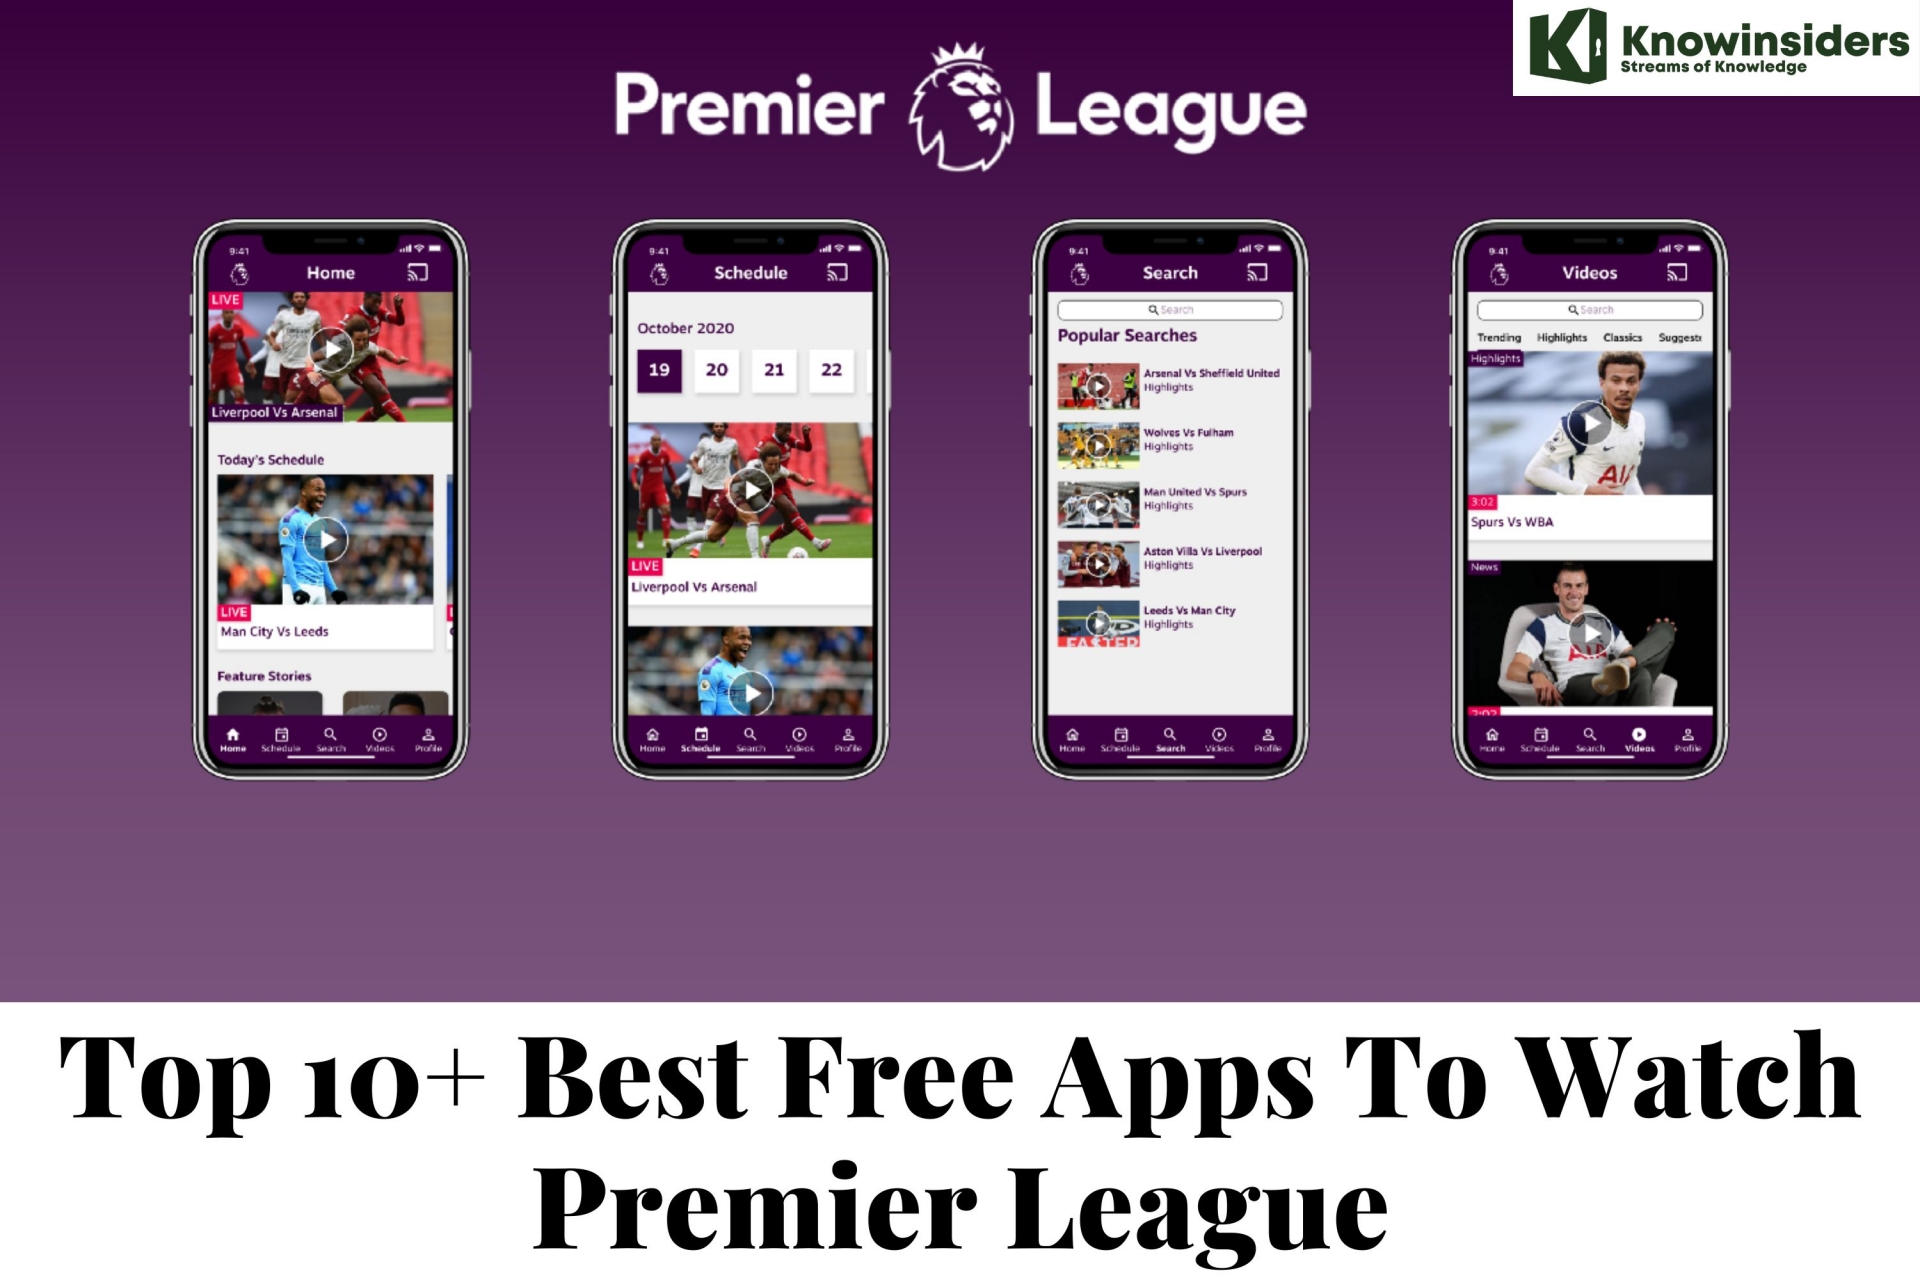 Top 10+ Best Free Apps To Watch Premier League and Links to Download Now KnowInsiders